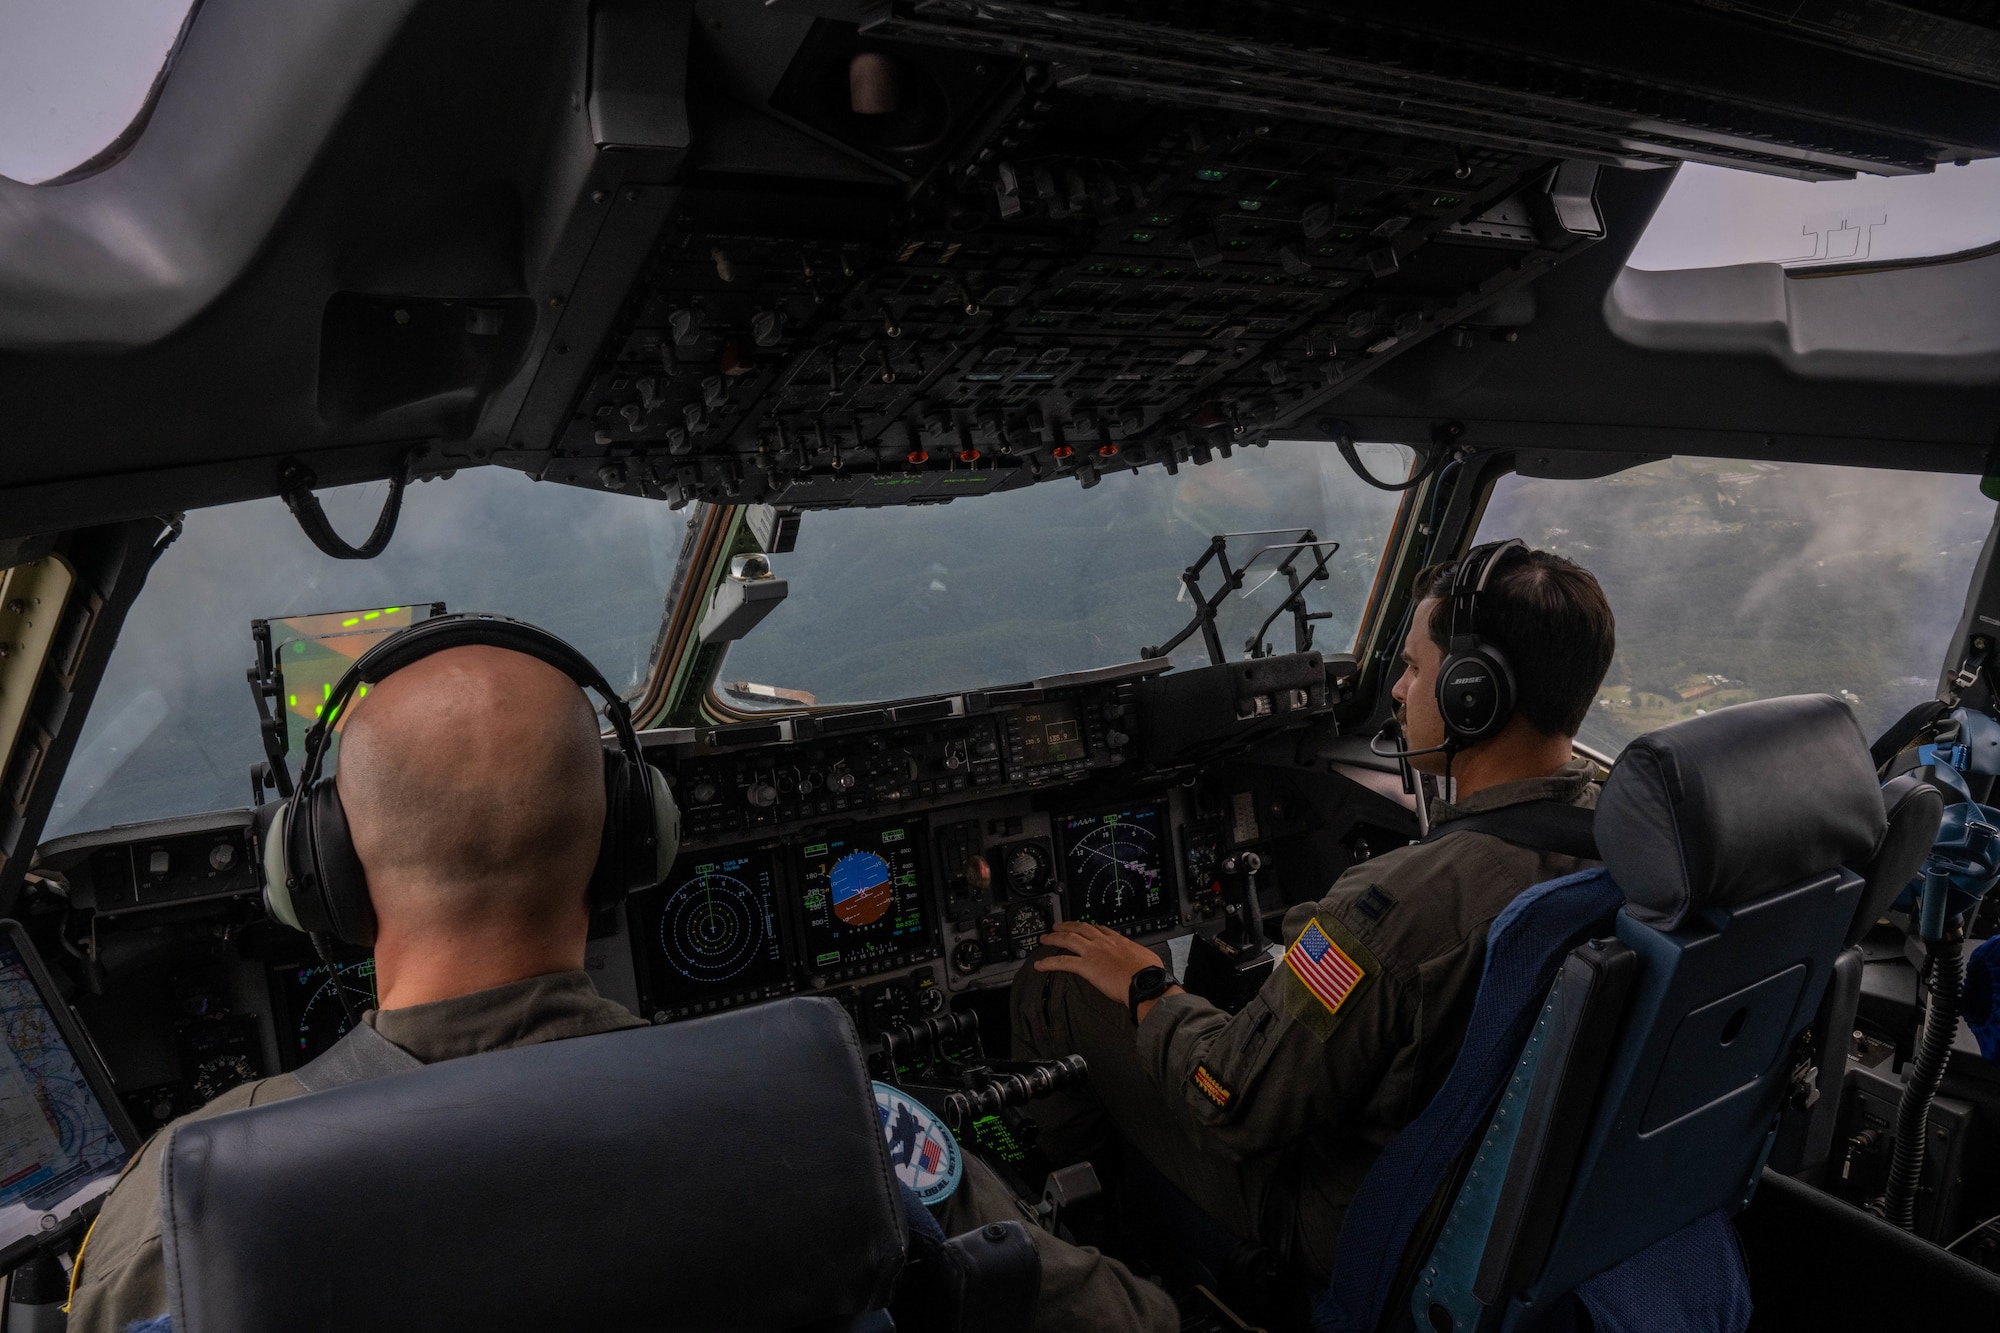 U.S. Air Force Maj. Dane Wold, No. 36 Squadron, pilot and U.S. Air Force Capt. Logan Hawke, 535th Airlift Squadron pilot, flies a C-17 Globemaster III during a training flight during Global Dexterity 23-1 around Queensland, Australia, April 25, 2023. Exercise Global Dexterity 2023 is being conducted at Royal Australian Air Force Base Amberley, and is designed to help enhance air cooperation between the U.S. and Australia and increase our combined capabilities, improving security and stability in the Indo-Pacific Region. (U.S. Air Force photo by Senior Airman Makensie Cooper)